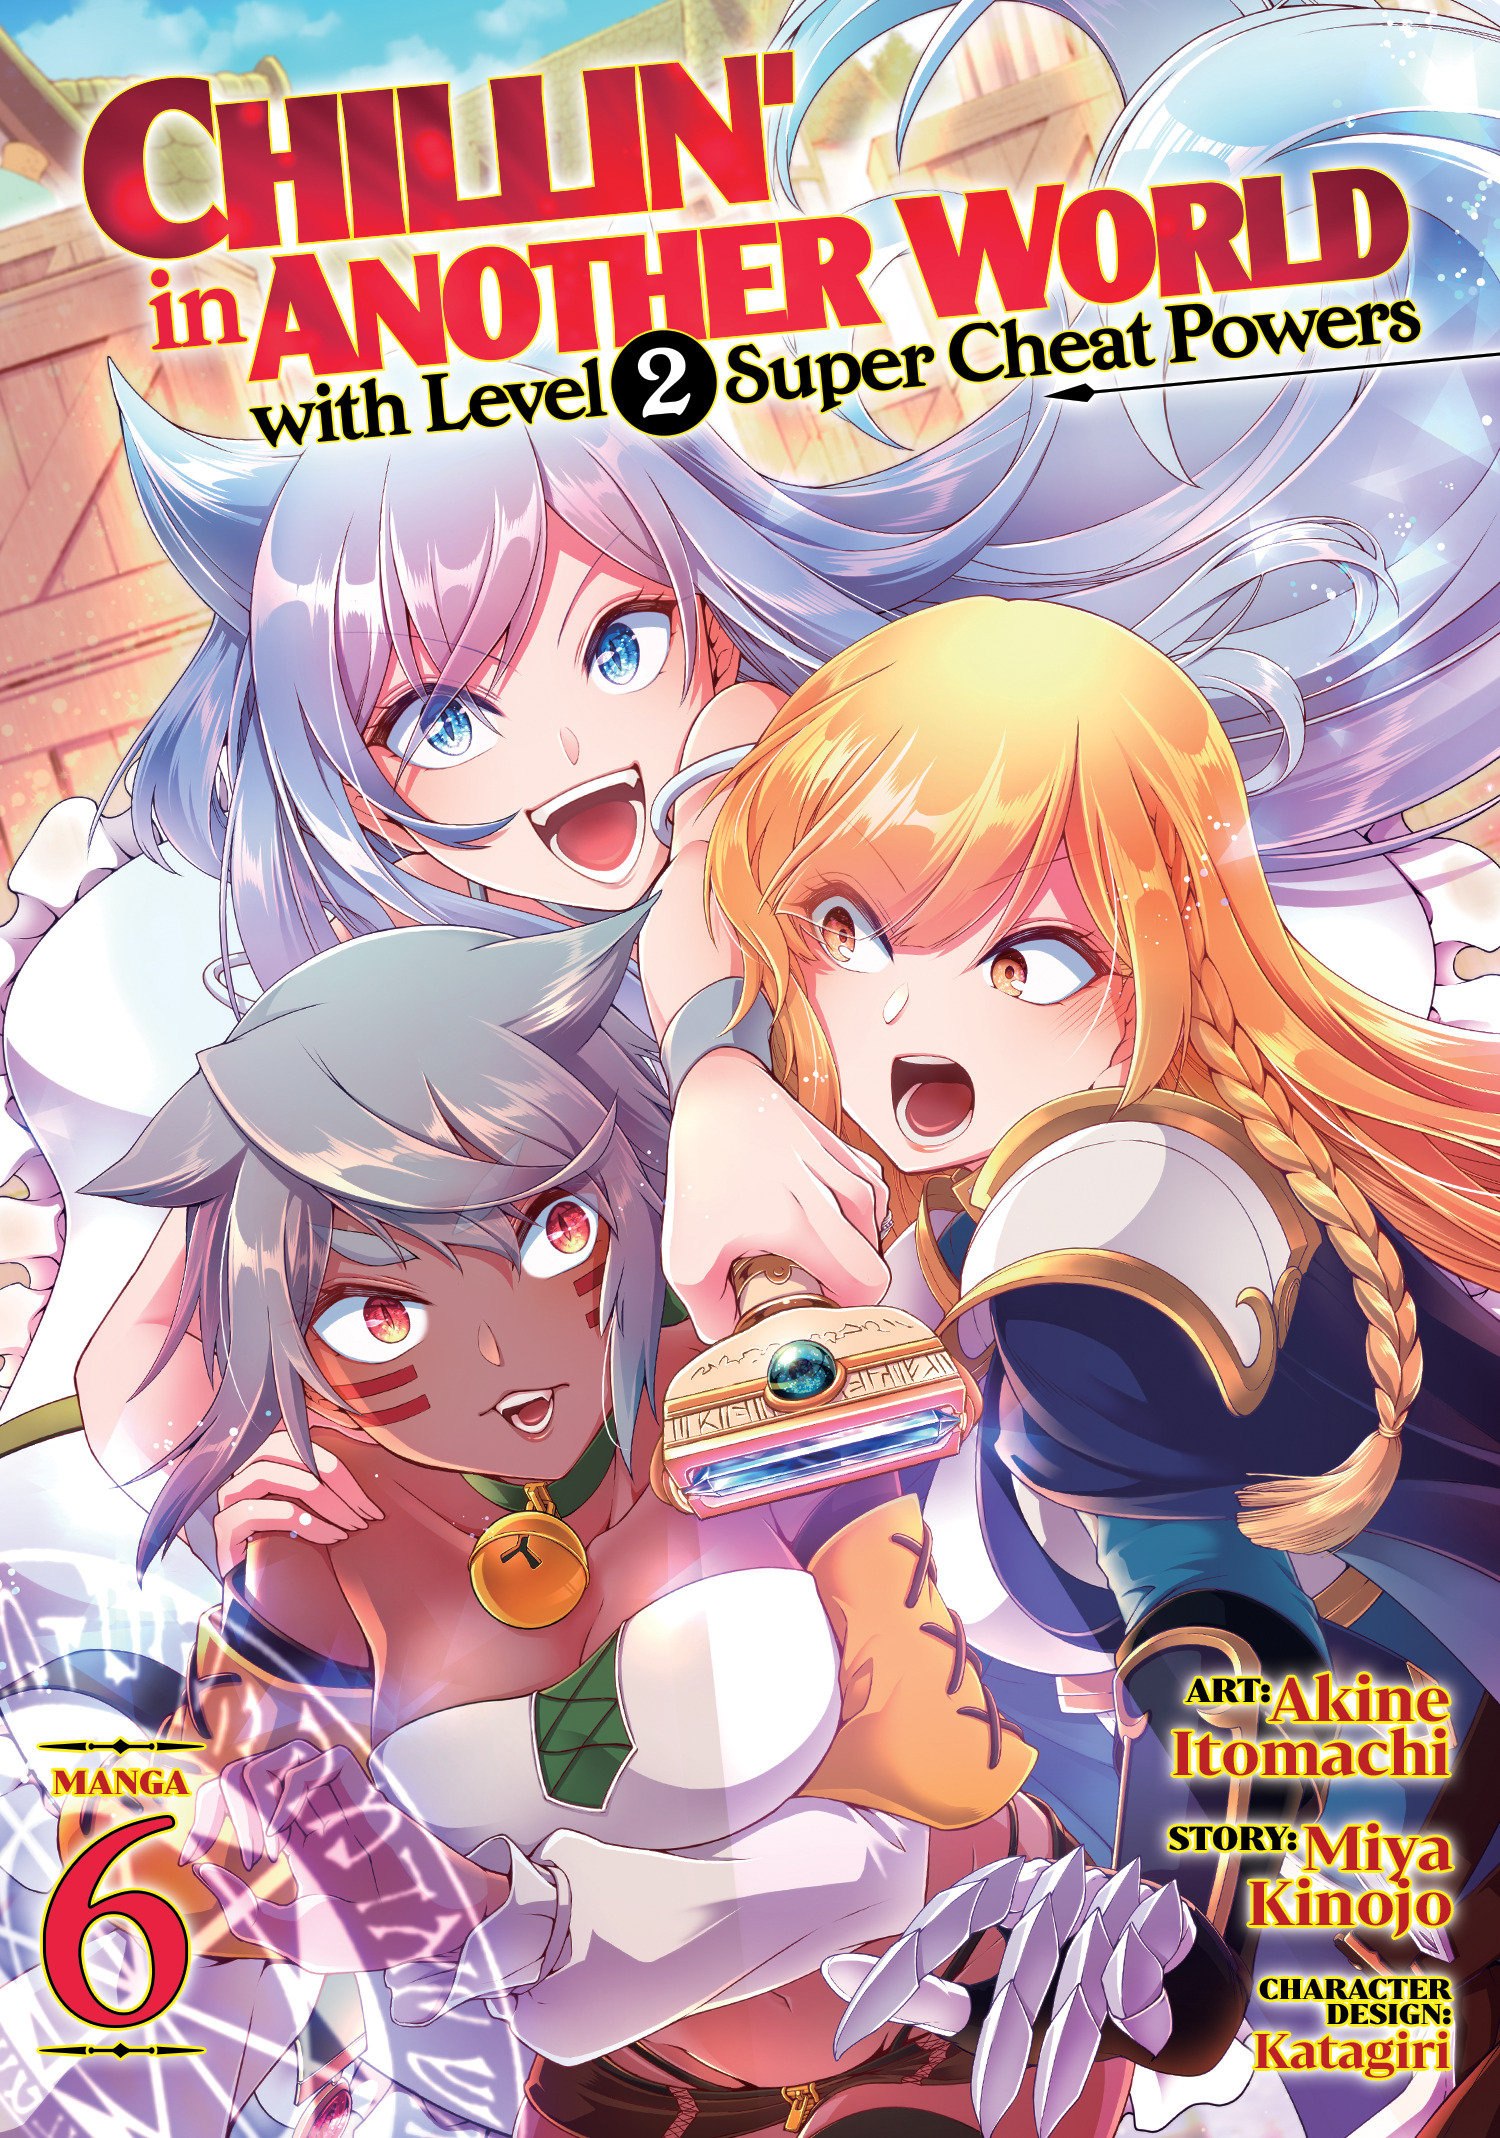 Chillin' in Another World with Level 2 Super Cheat Powers Manga Volume 6